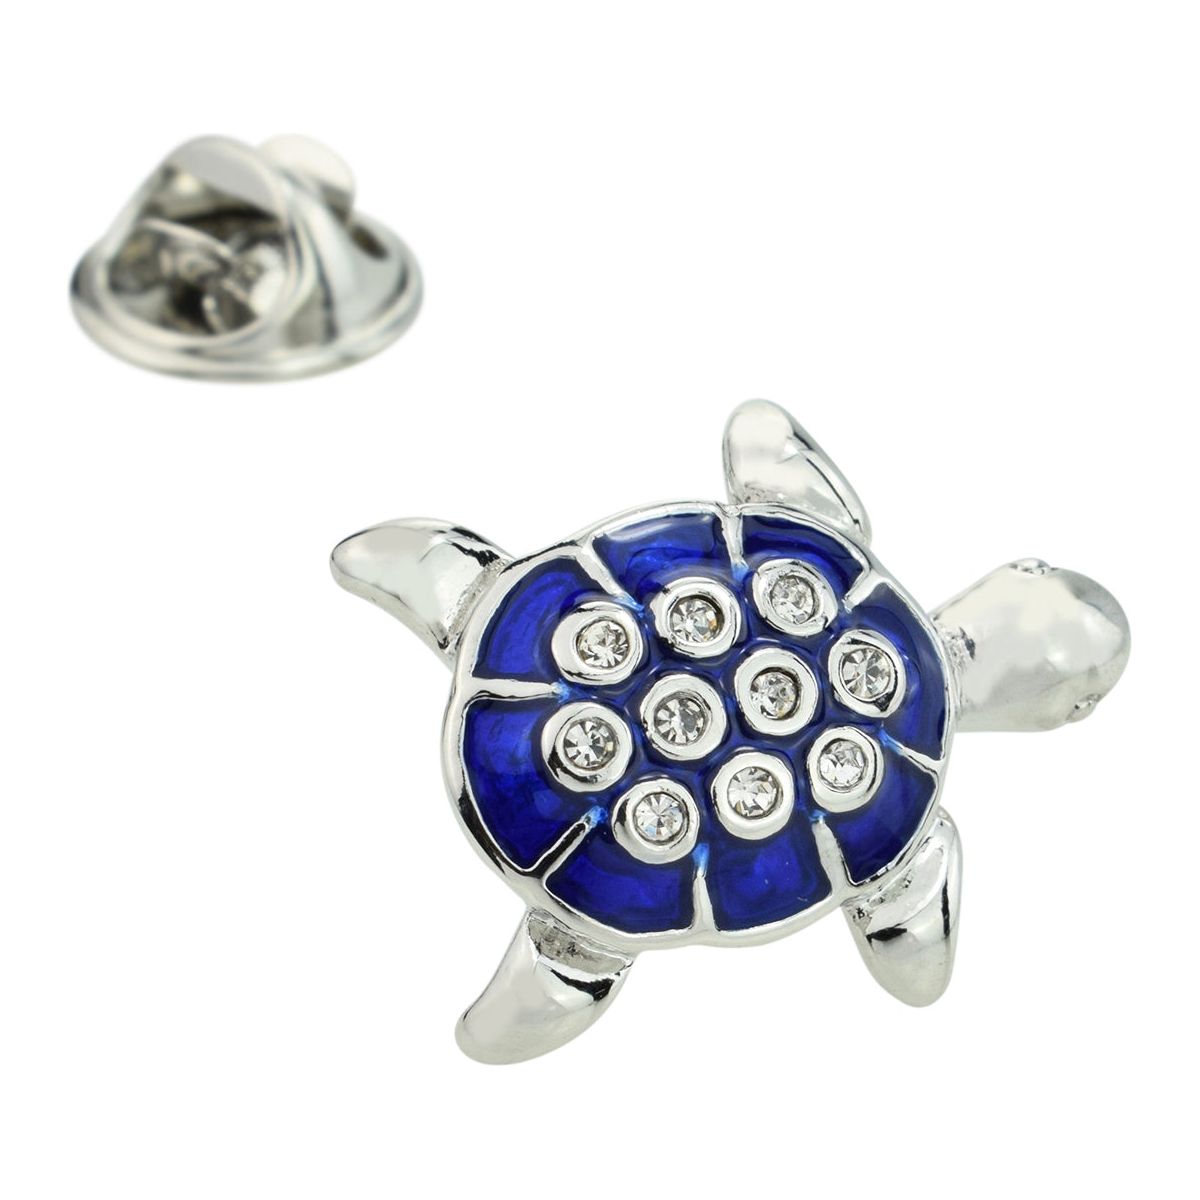 Blue & Crystal Turtle Lapel Pin Badge - Ashton and Finch